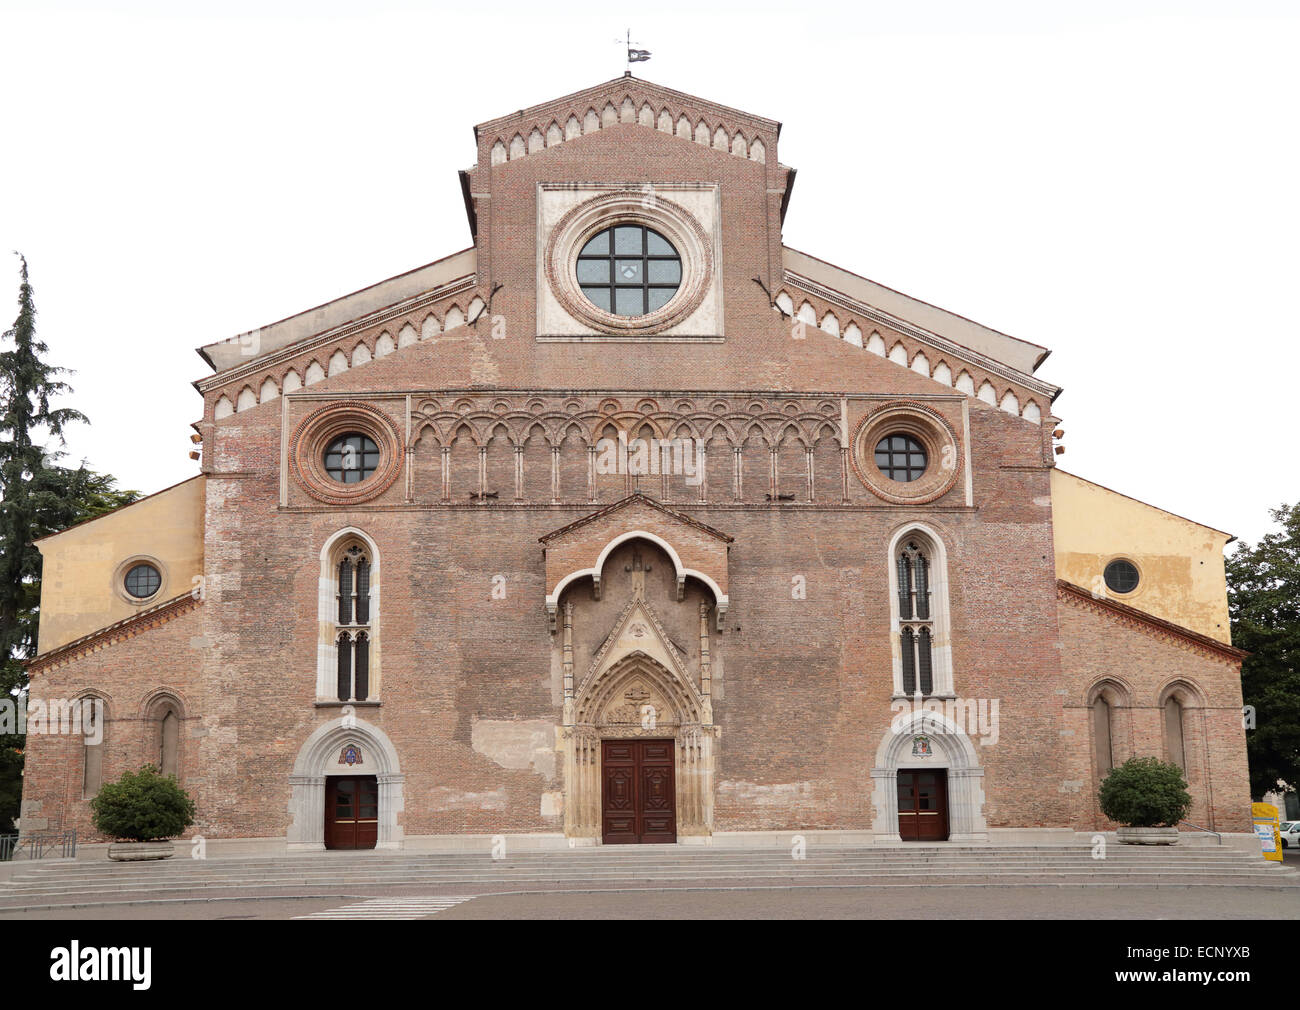 Frontal view of the roman Catholic Cathedral Santa Maria Maggiore of Udine, Italy Stock Photo